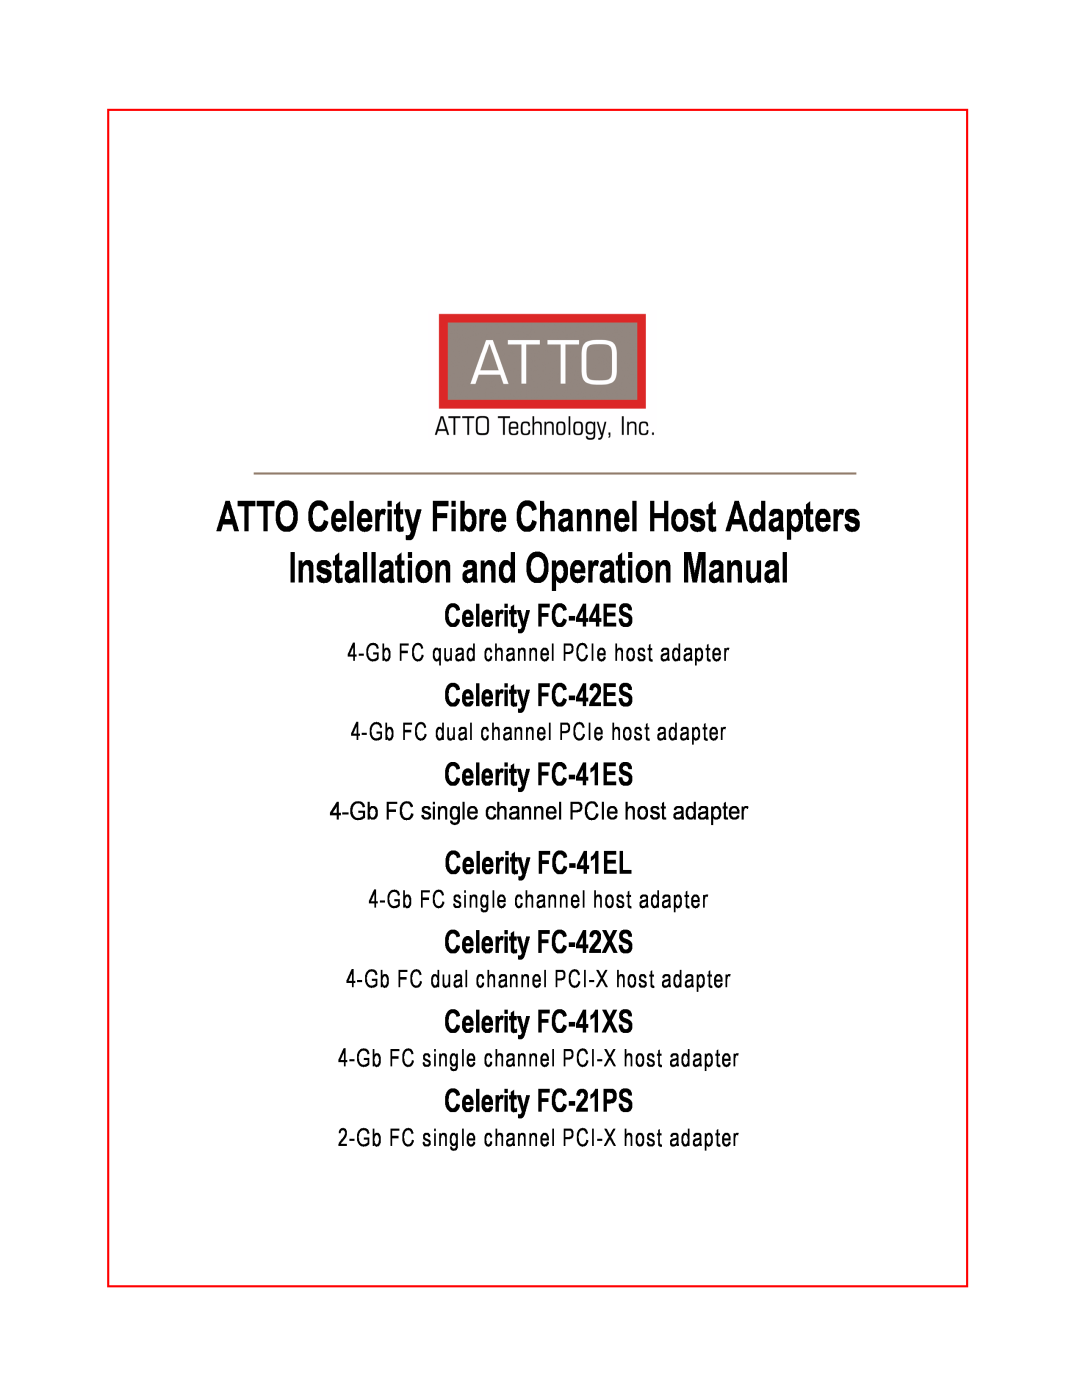 ATTO Technology FC-41EL operation manual ATTO Celerity Fibre Channel Host Adapters, Installation and Operation Manual 